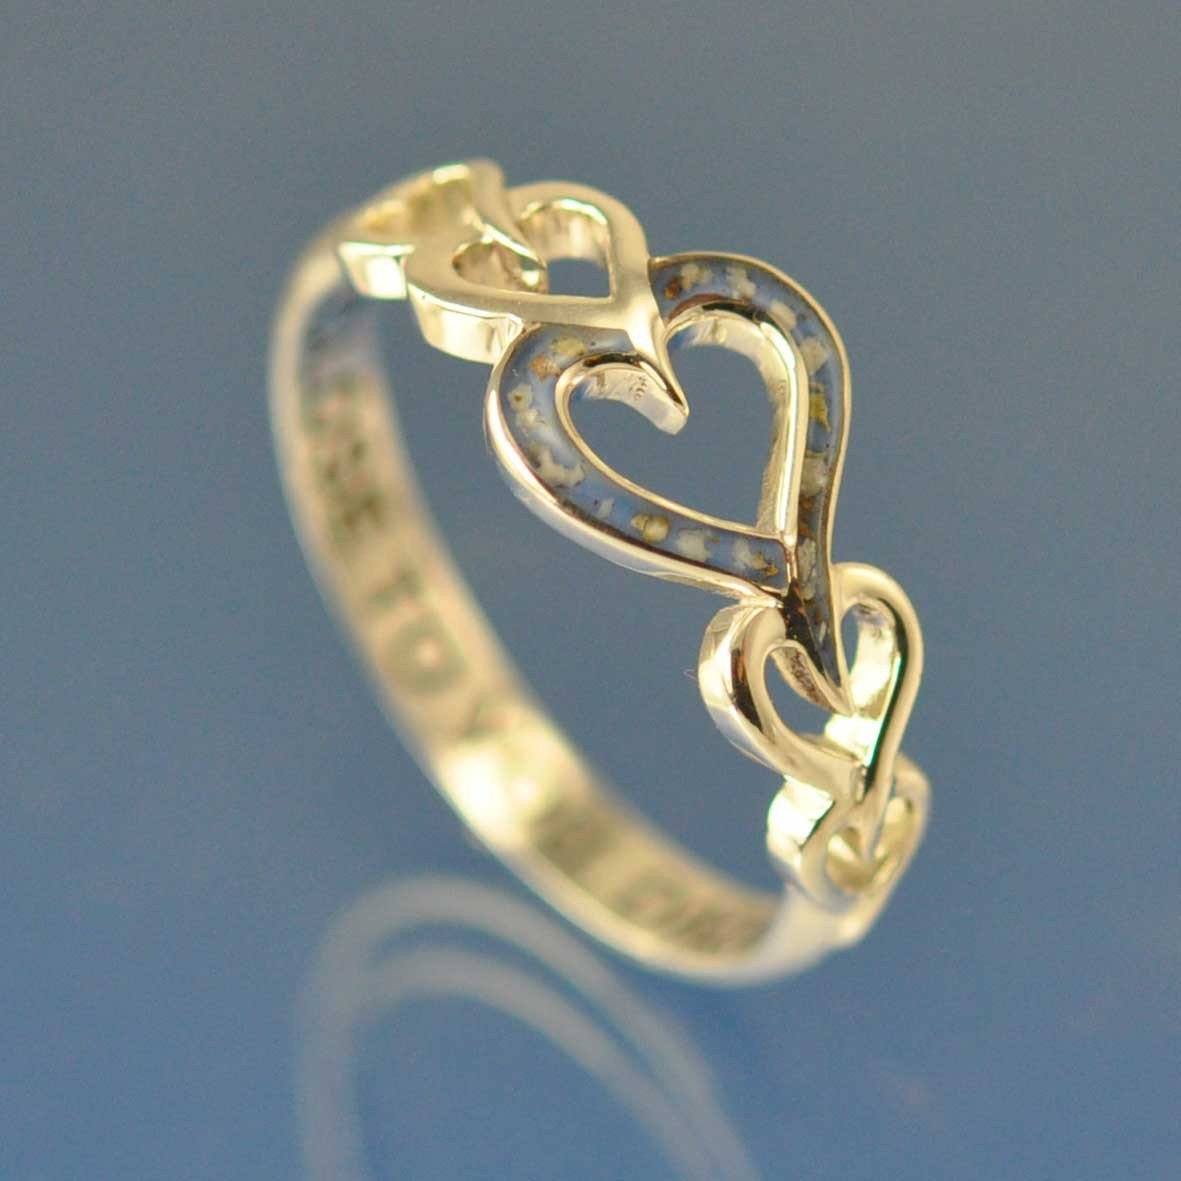 Cremation Ash Ring - Resin Entwined Hearts Ring by Chris Parry Jewellery